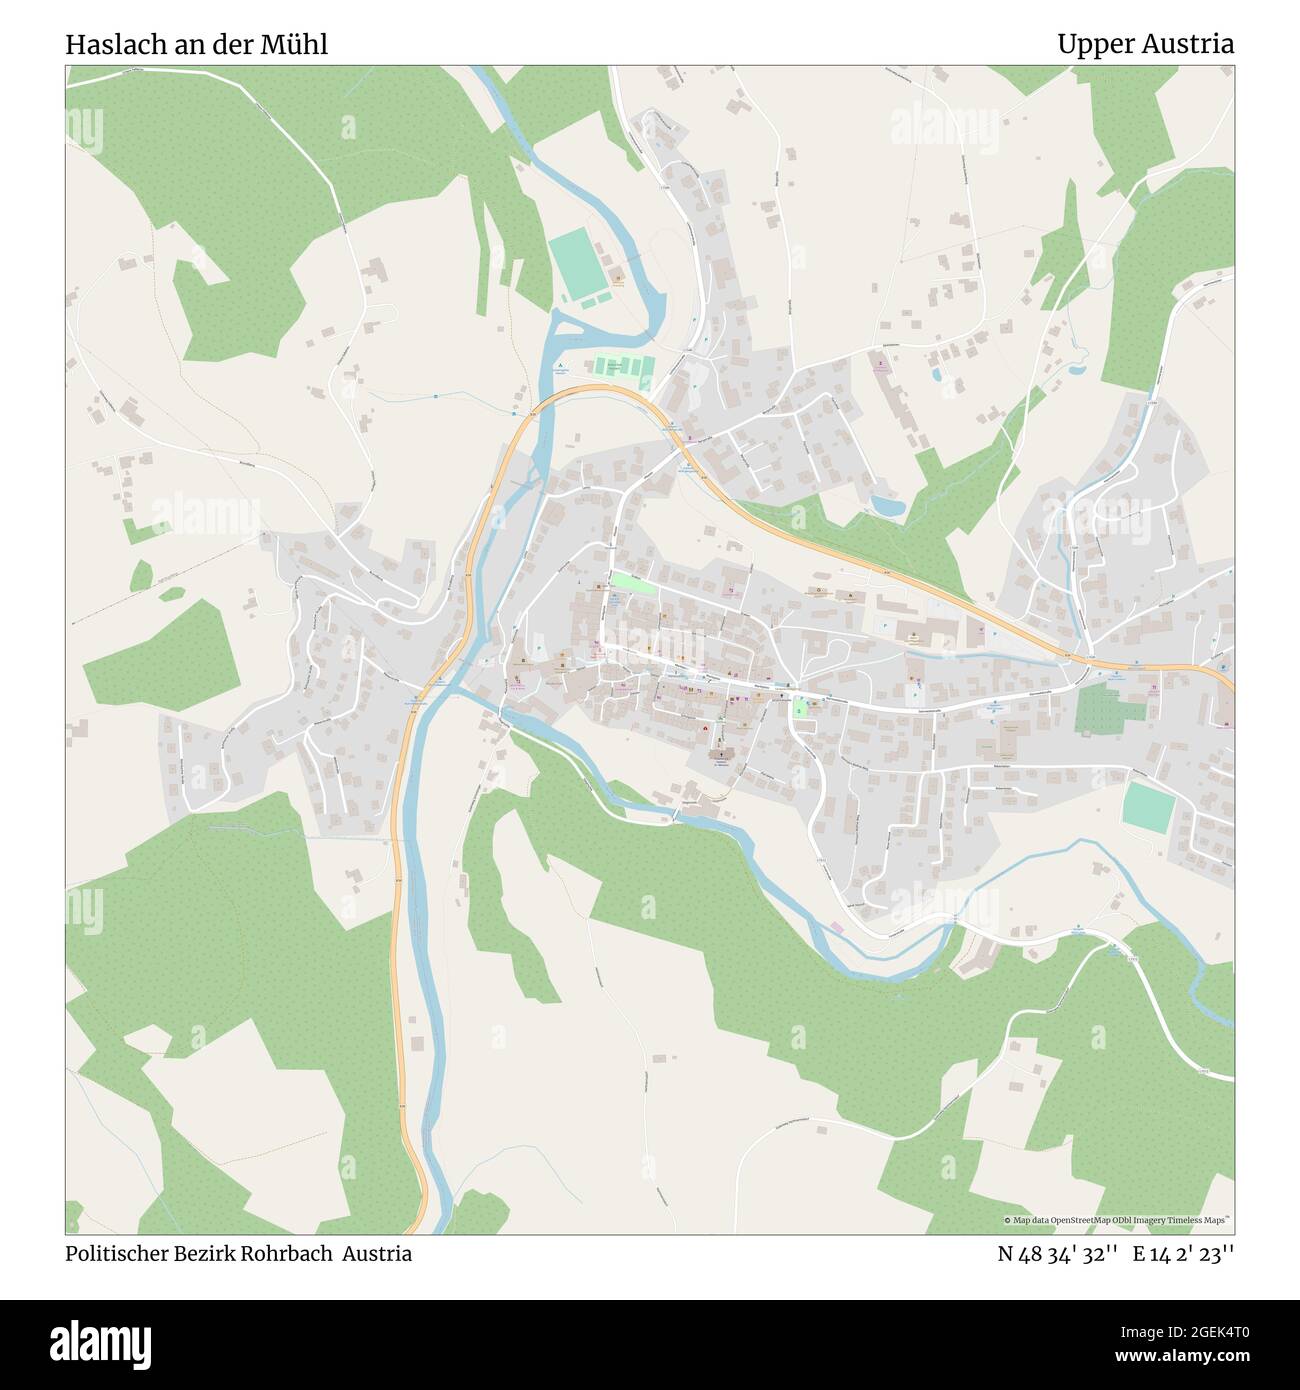 Haslach an der Mühl, Politischer Bezirk Rohrbach, Austria, Upper Austria, N 48 34' 32'', E 14 2' 23'', map, Timeless Map published in 2021. Travelers, explorers and adventurers like Florence Nightingale, David Livingstone, Ernest Shackleton, Lewis and Clark and Sherlock Holmes relied on maps to plan travels to the world's most remote corners, Timeless Maps is mapping most locations on the globe, showing the achievement of great dreams Stock Photo